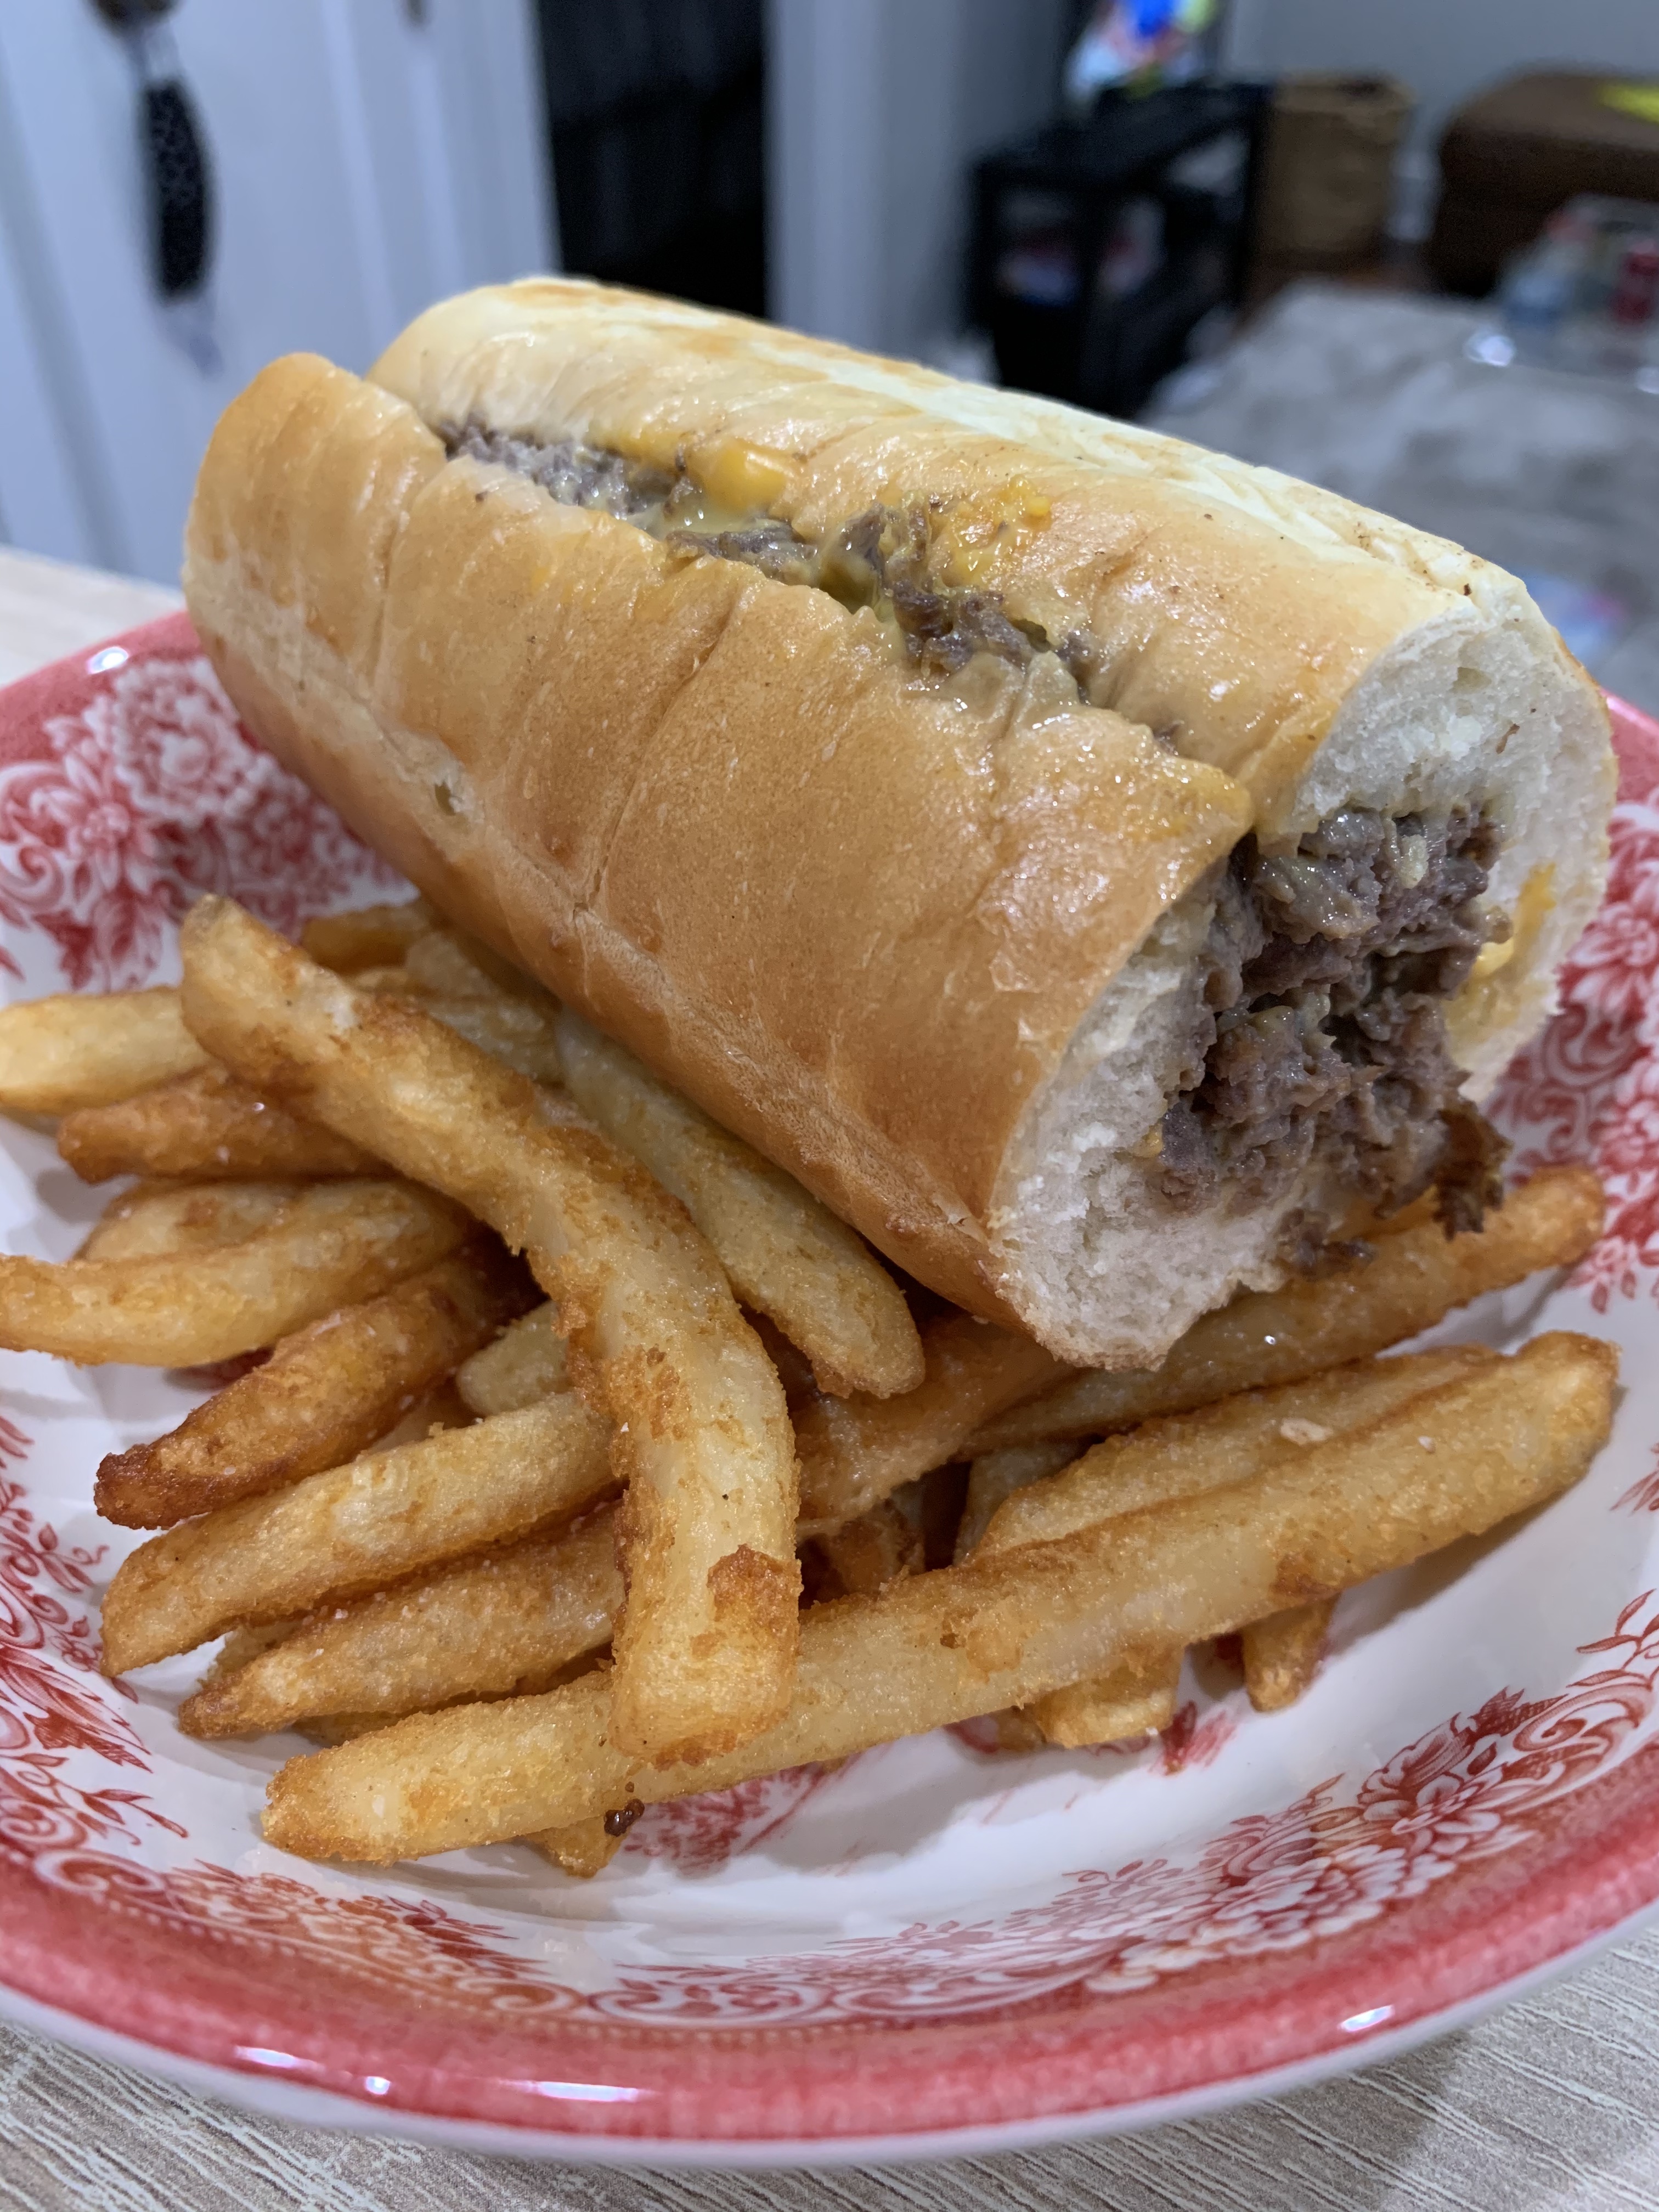 Philly cheesesteak sitting atop a bed of fries in a red and white patterned bowl